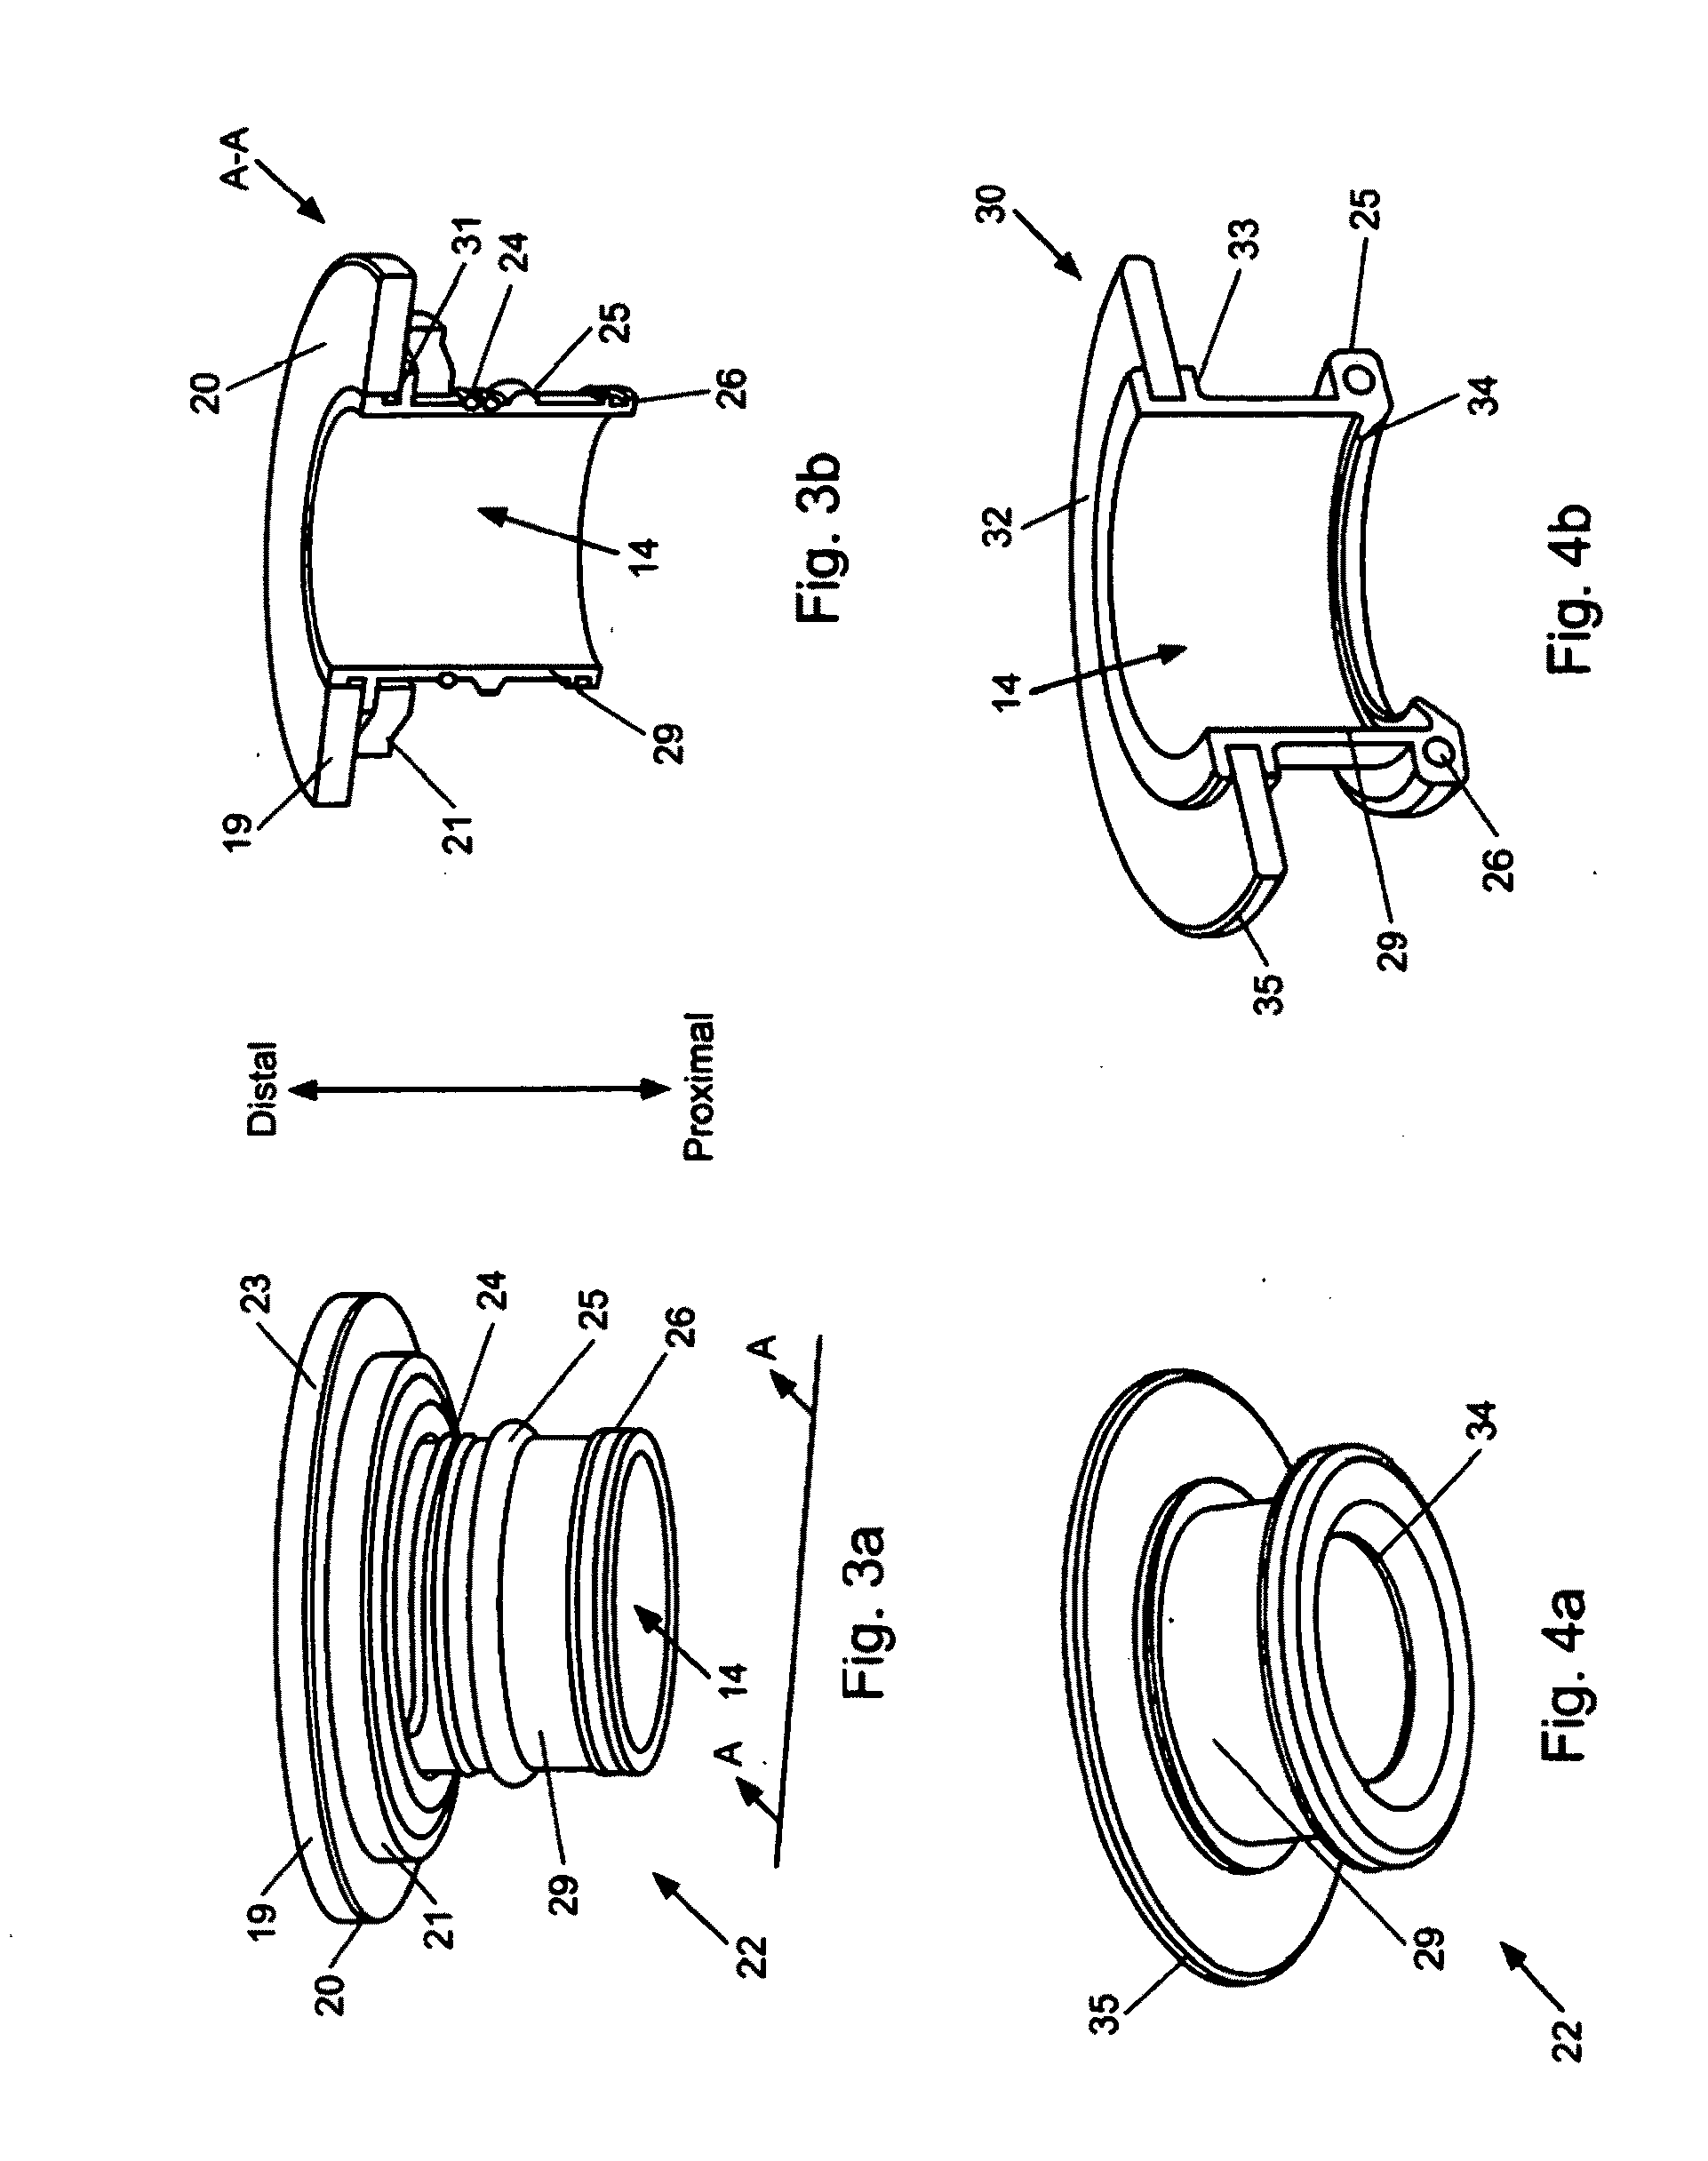 Attachment device and method